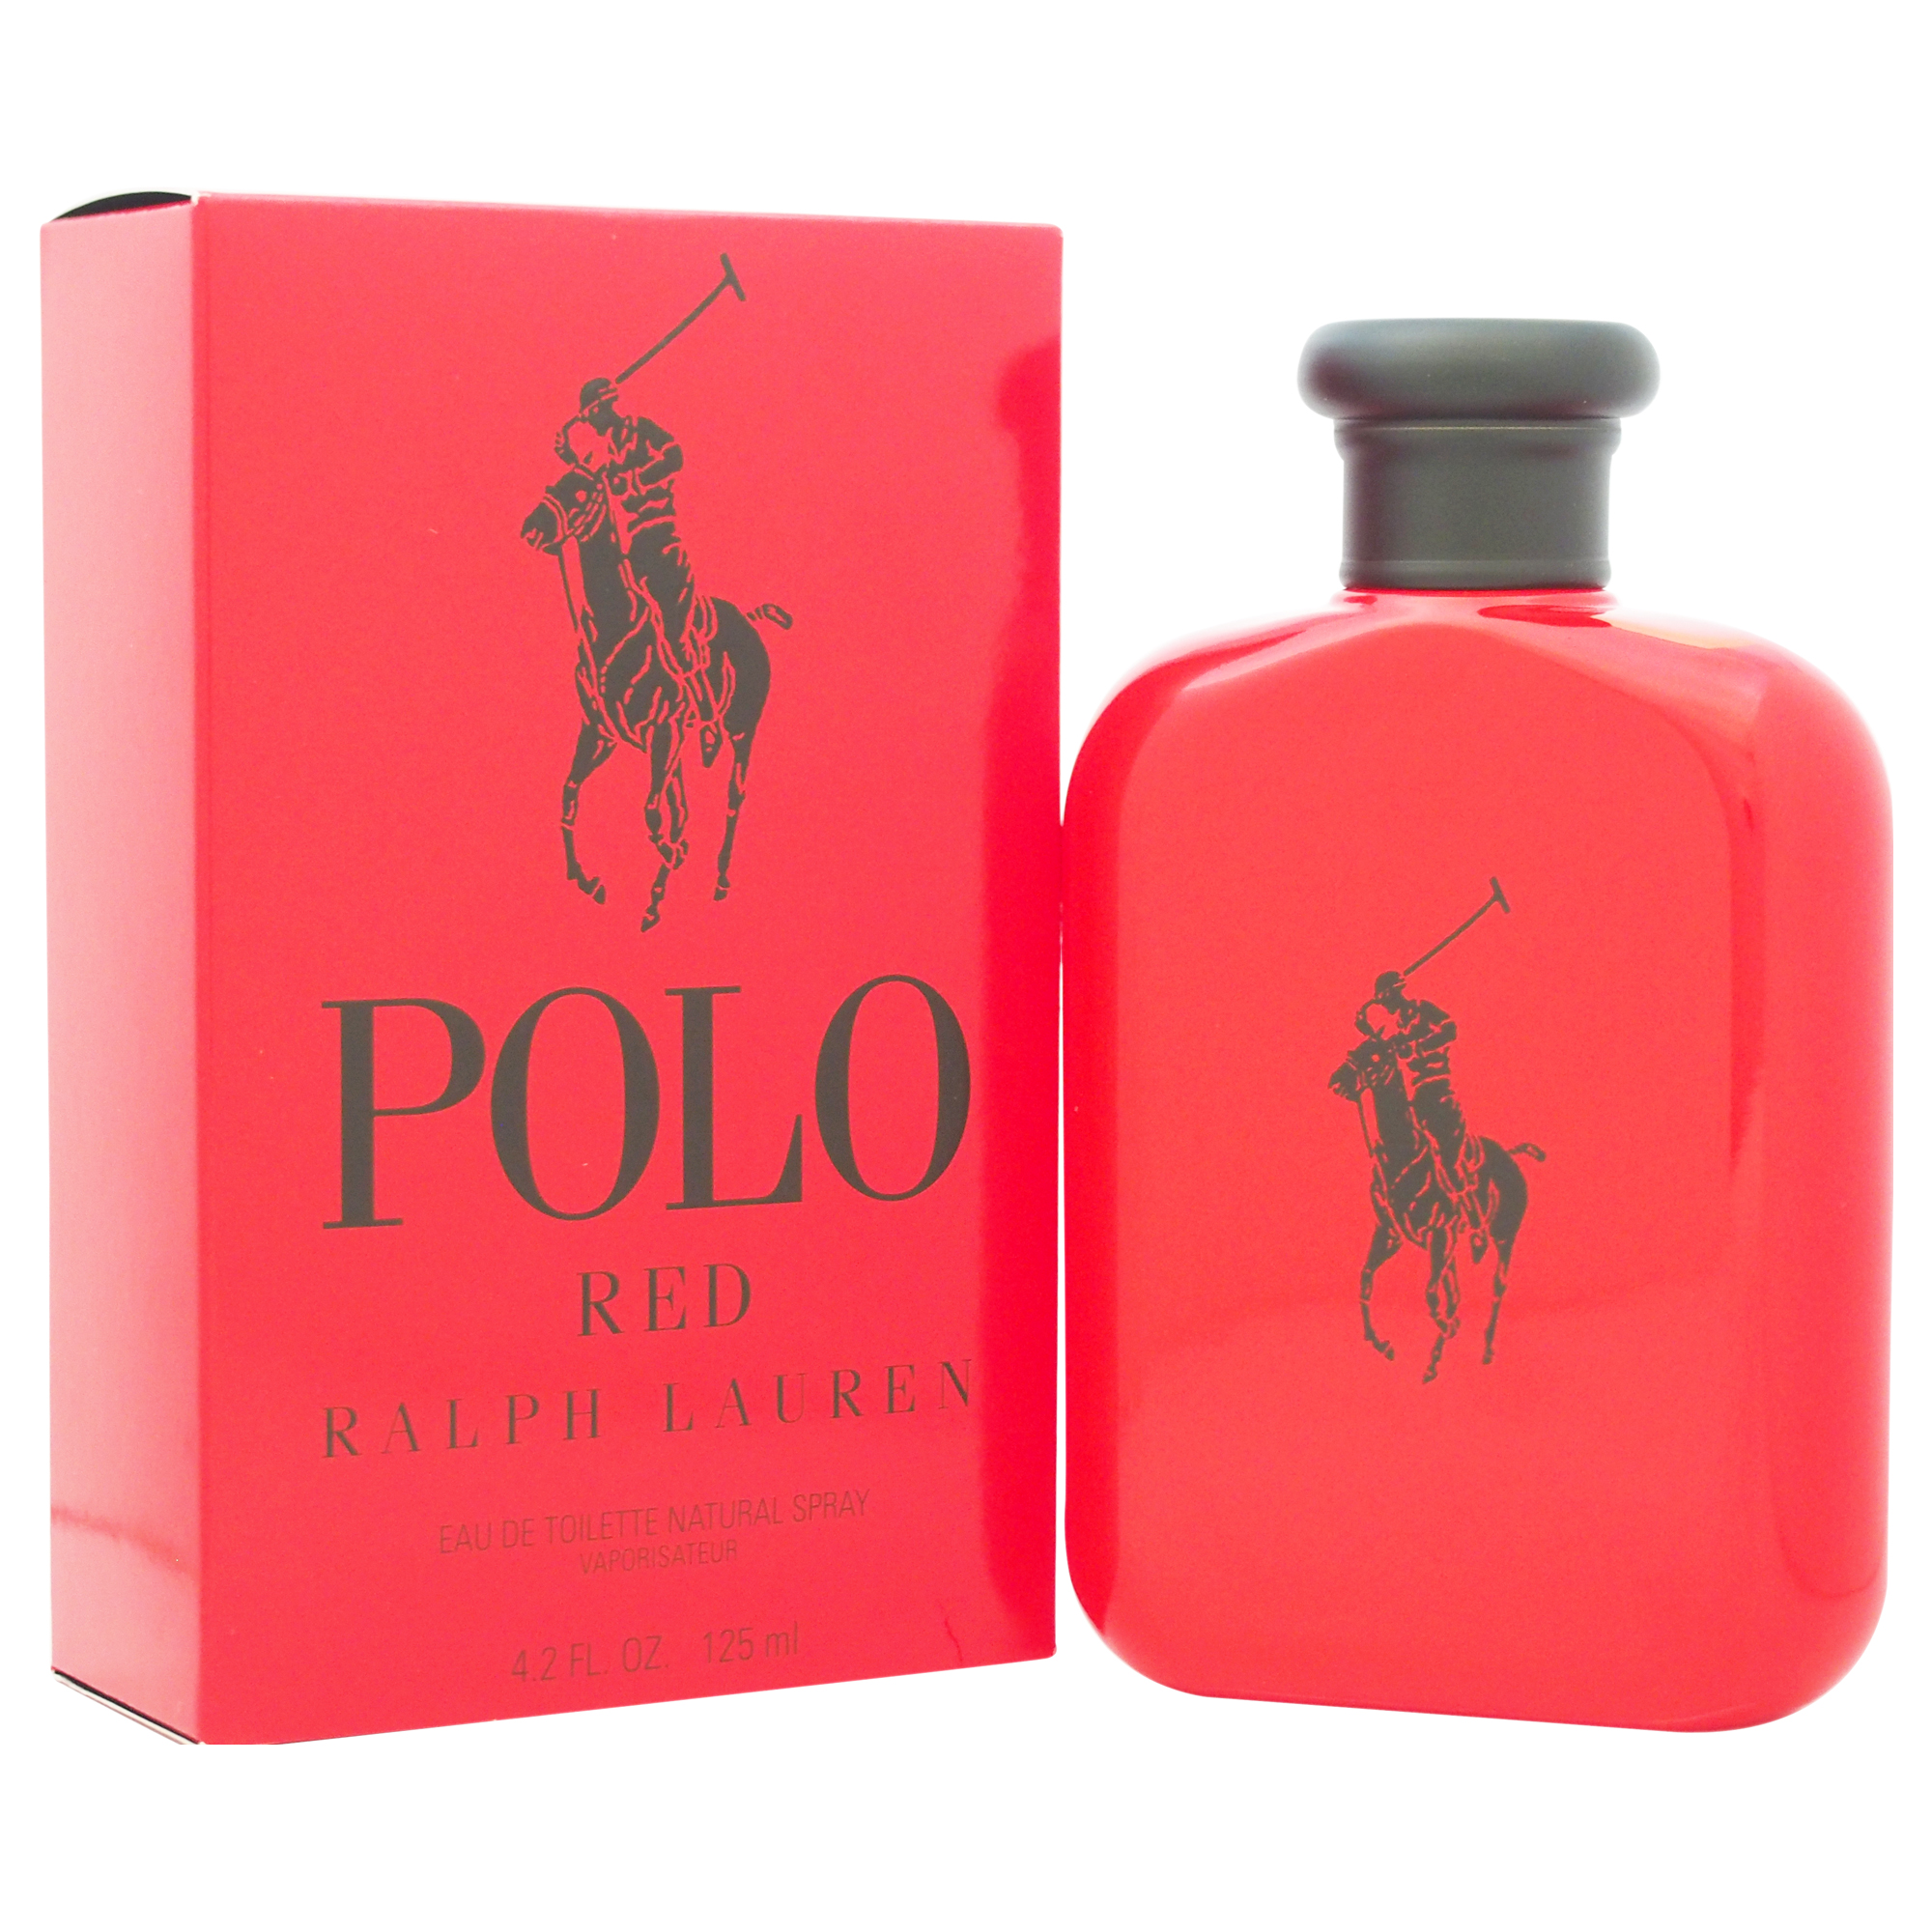 POLO RED by Ralph Lauren for Men - 4.2 oz EDT Spray